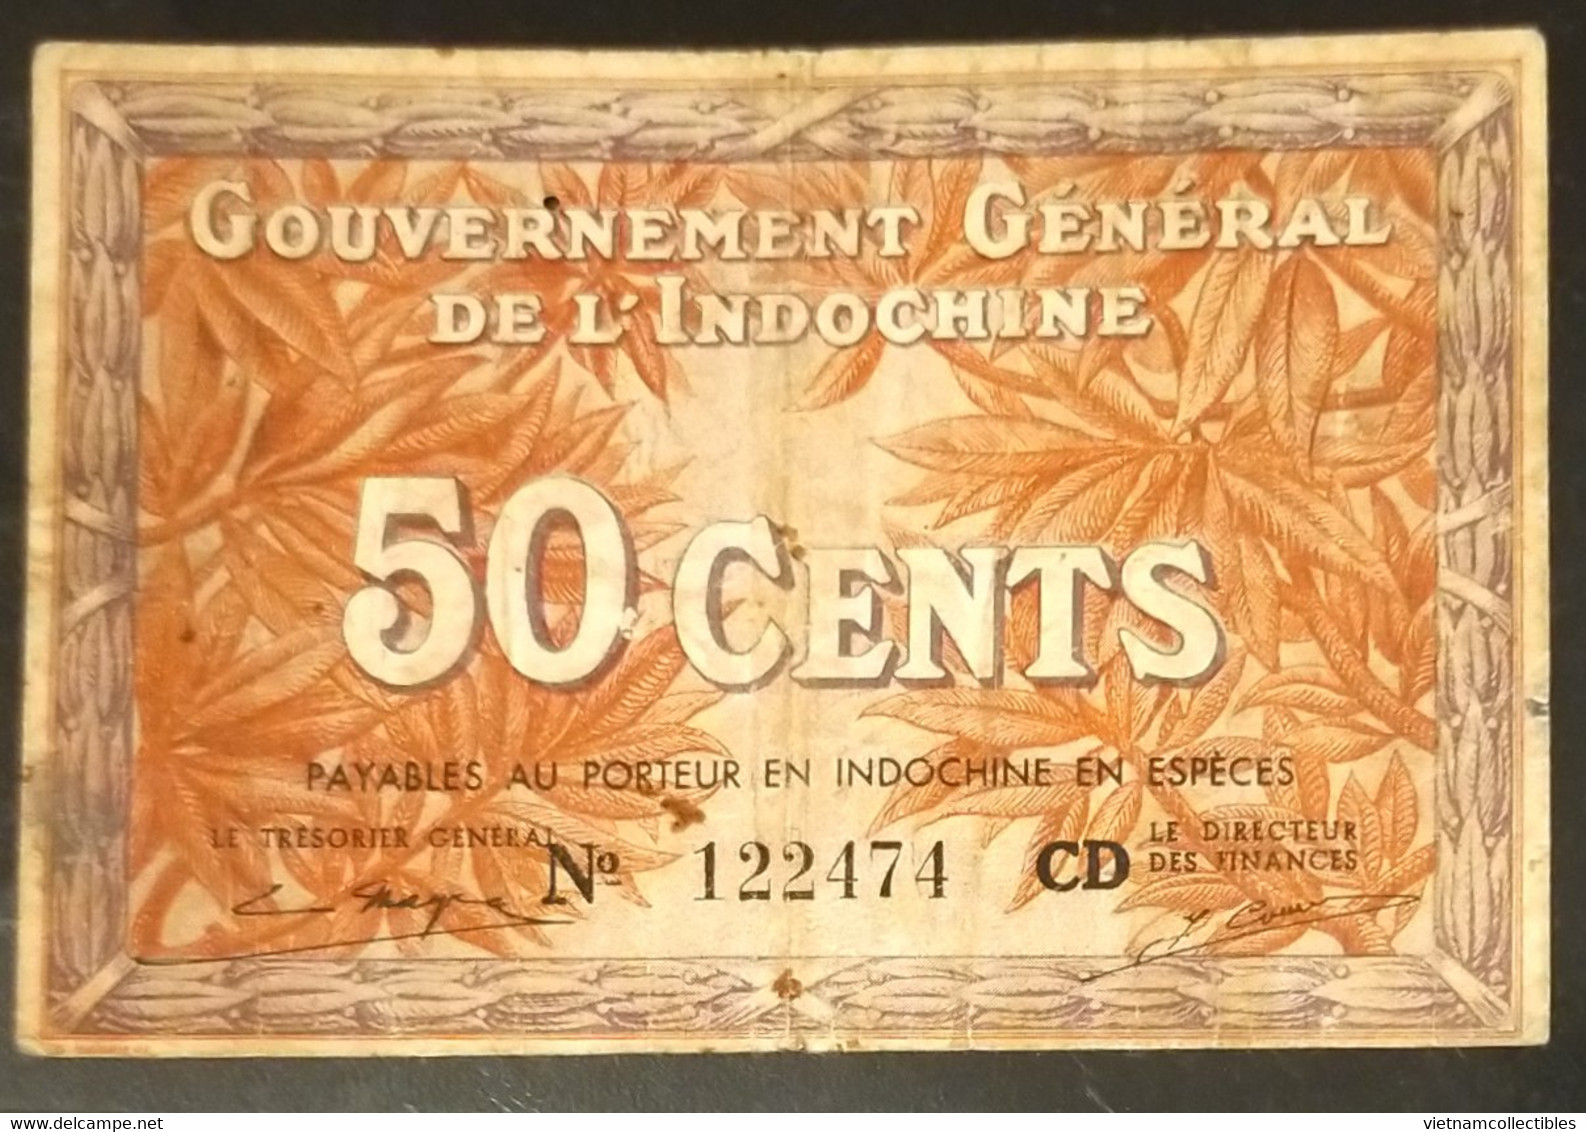 French Indochine Indochina Vietnam Viet Nam Laos Cambodia 50 Cents VF Banknote Note 1939 - Pick # 87e / 2 Photos - Indochine